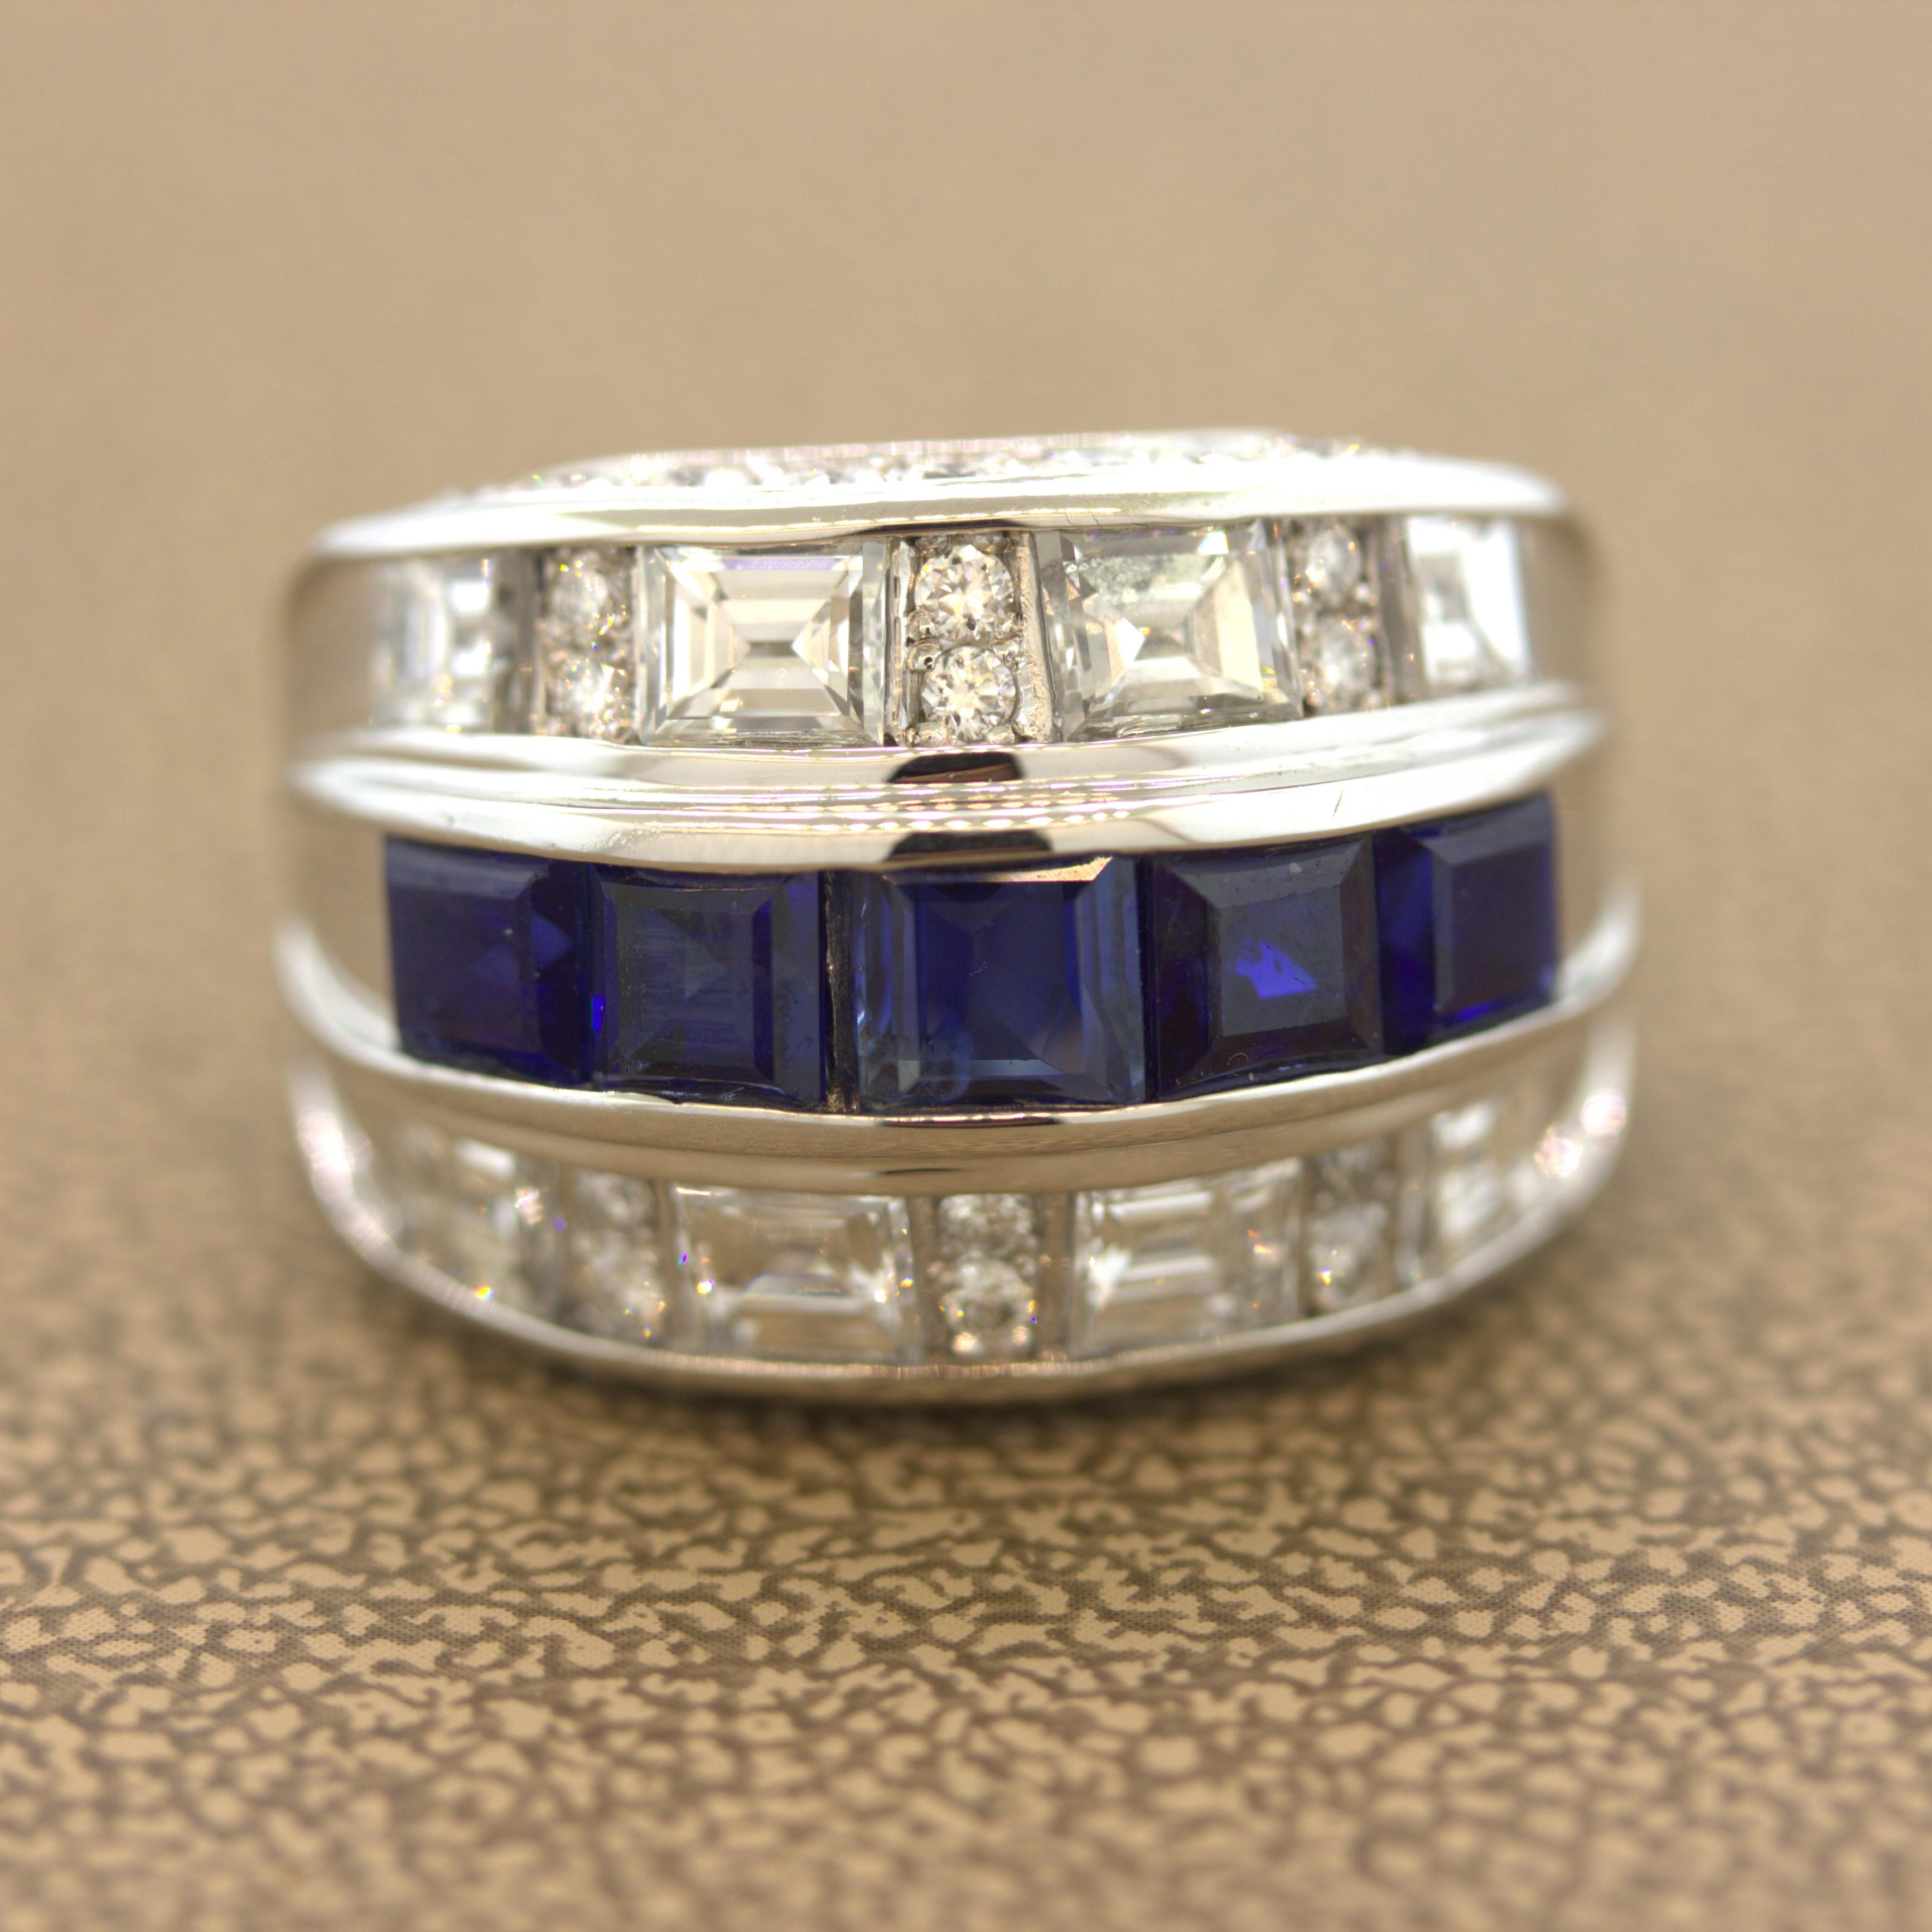 A very well made wide platinum band featuring sapphires and diamonds! There are 5 large square-shape blue sapphires set in the center of the ring weighing a total of 2.68 carats. Above and below the row of sapphires are round brilliant-cut and large